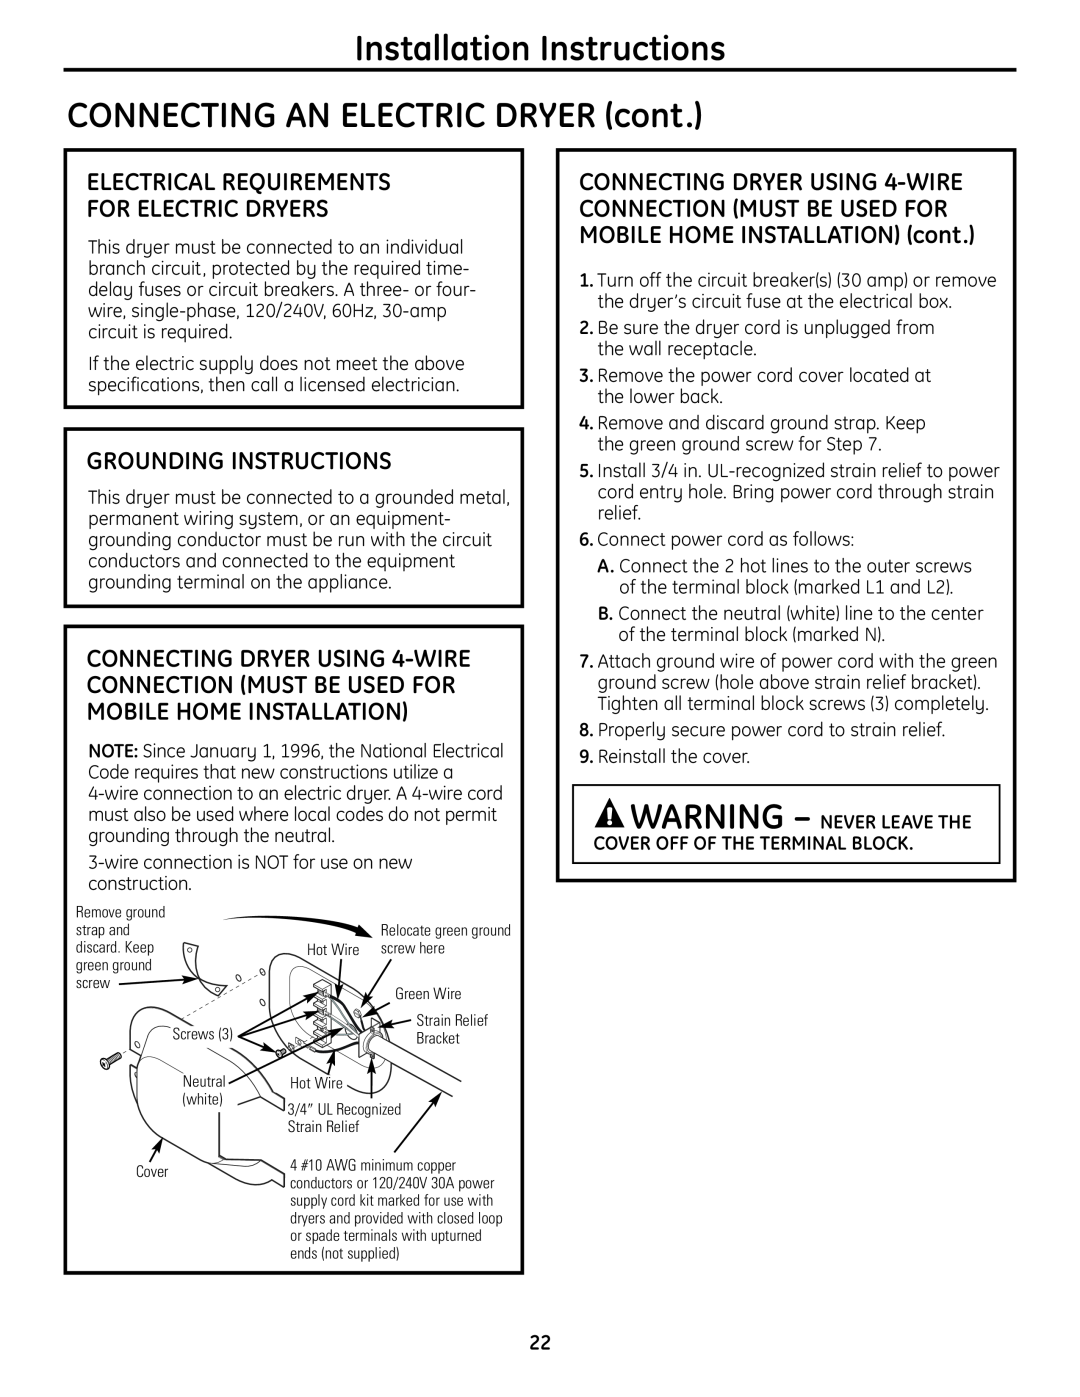 GE UPVH890 Installation Instructions CONNECTING AN ELECTRIC DRYER cont, Electrical Requirements For Electric Dryers 